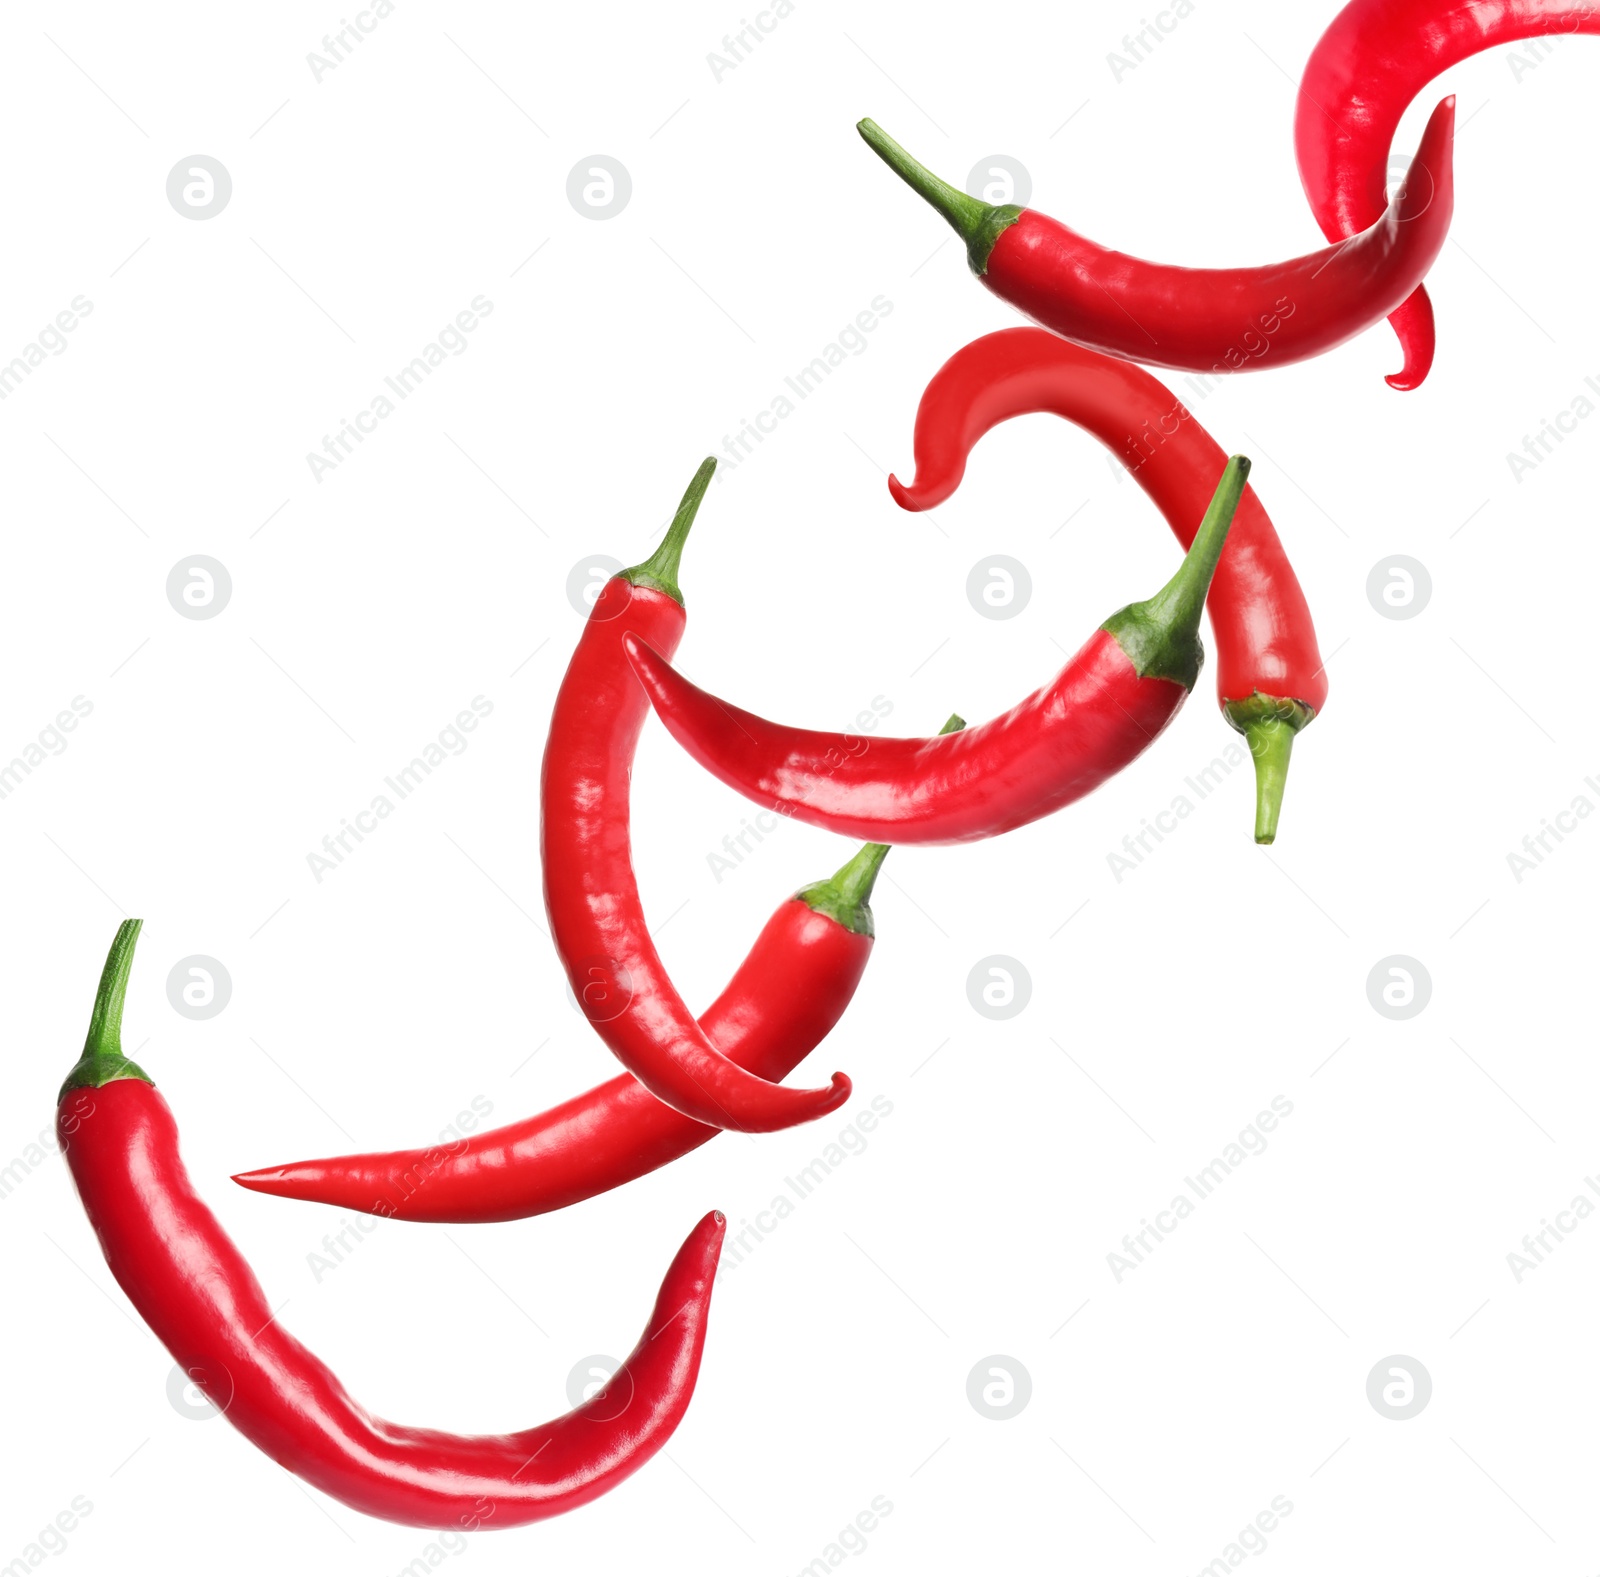 Image of Ripe red chili peppers flying on white background